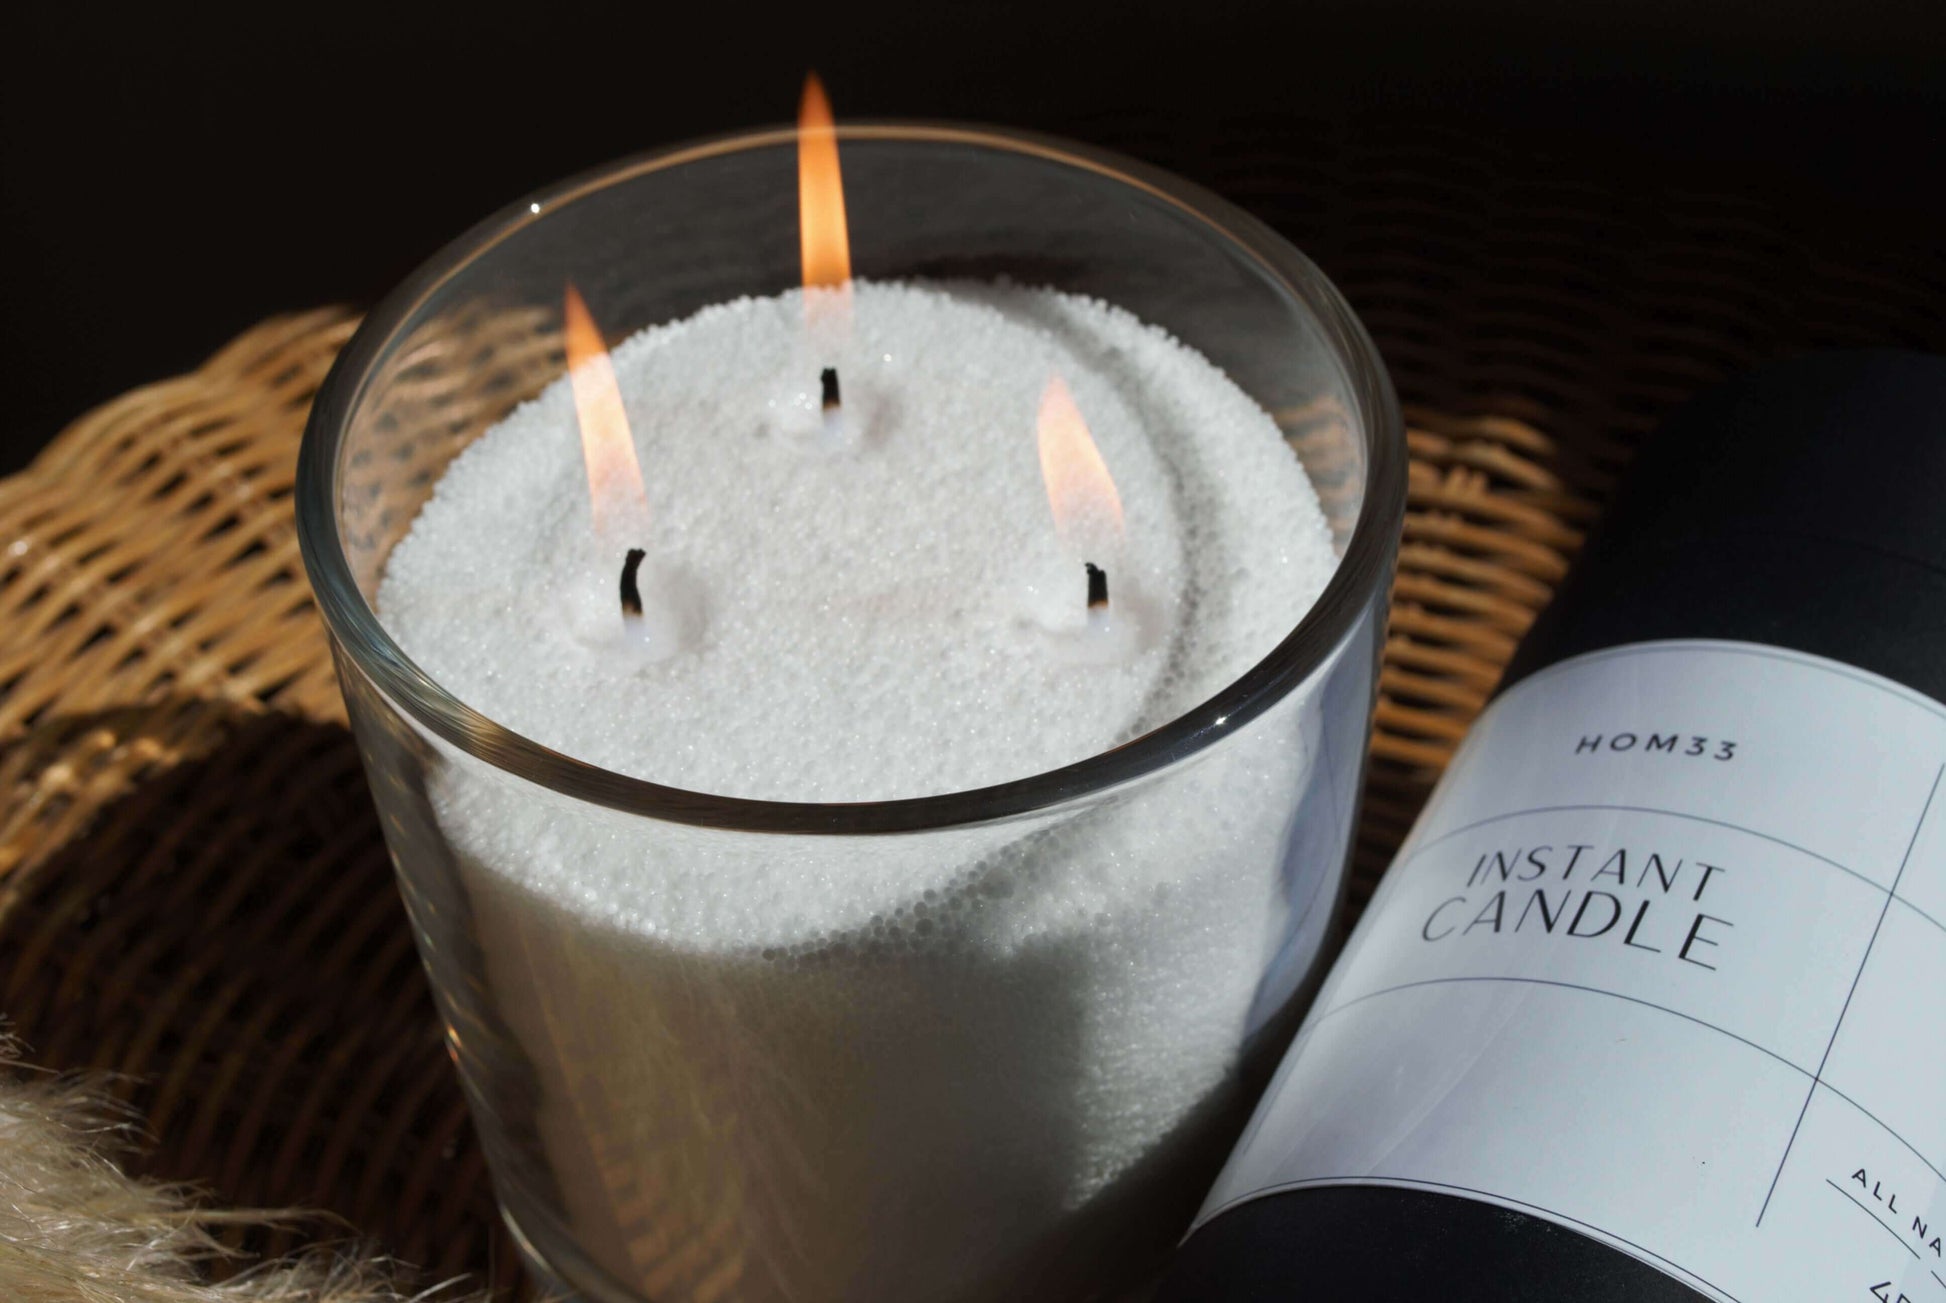 designer candles candles for men christmas candle holder candles jo malone candle sale candle melts glass candle jars yankee wax melts john lewis candles autumn candles electric wax melter m&s candles baobab candle glass tea light holders sainsbury's